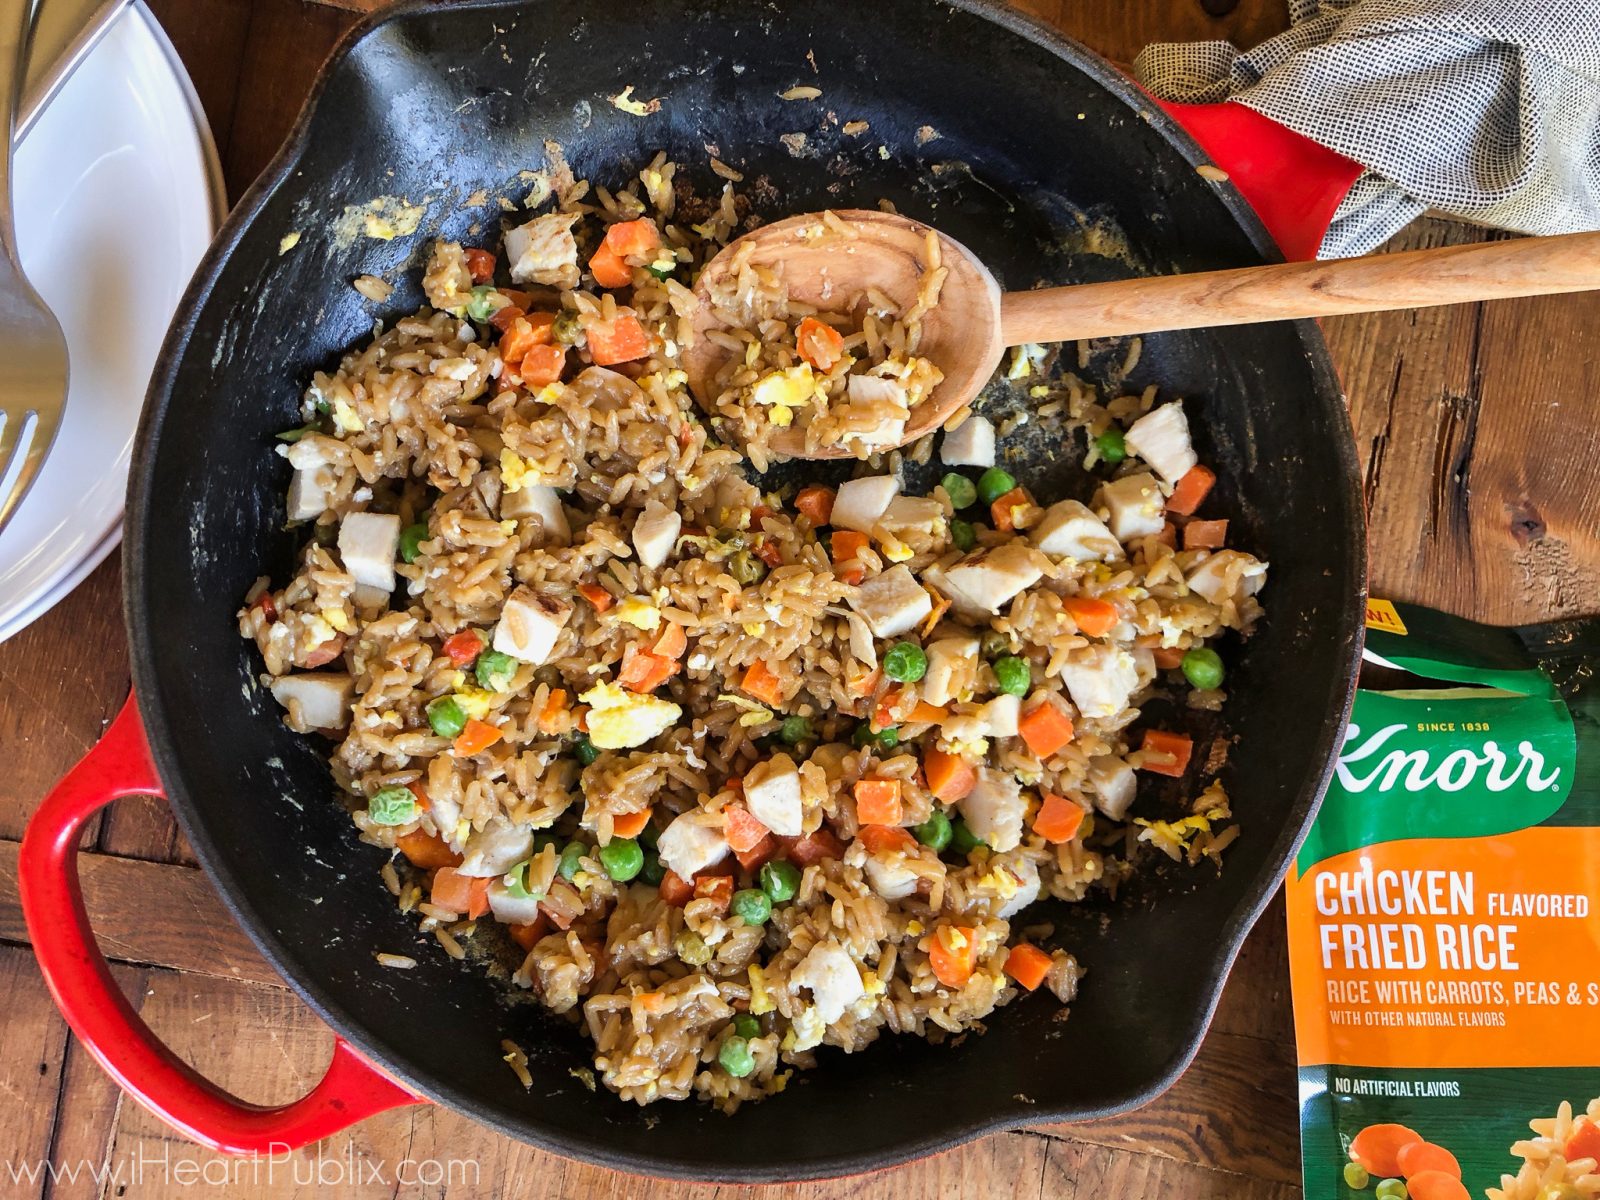 Still Time Save On Your Favorite Knorr Products At Publix – Grab A Deal For My Knorr 5 Minute Chicken Fried Rice